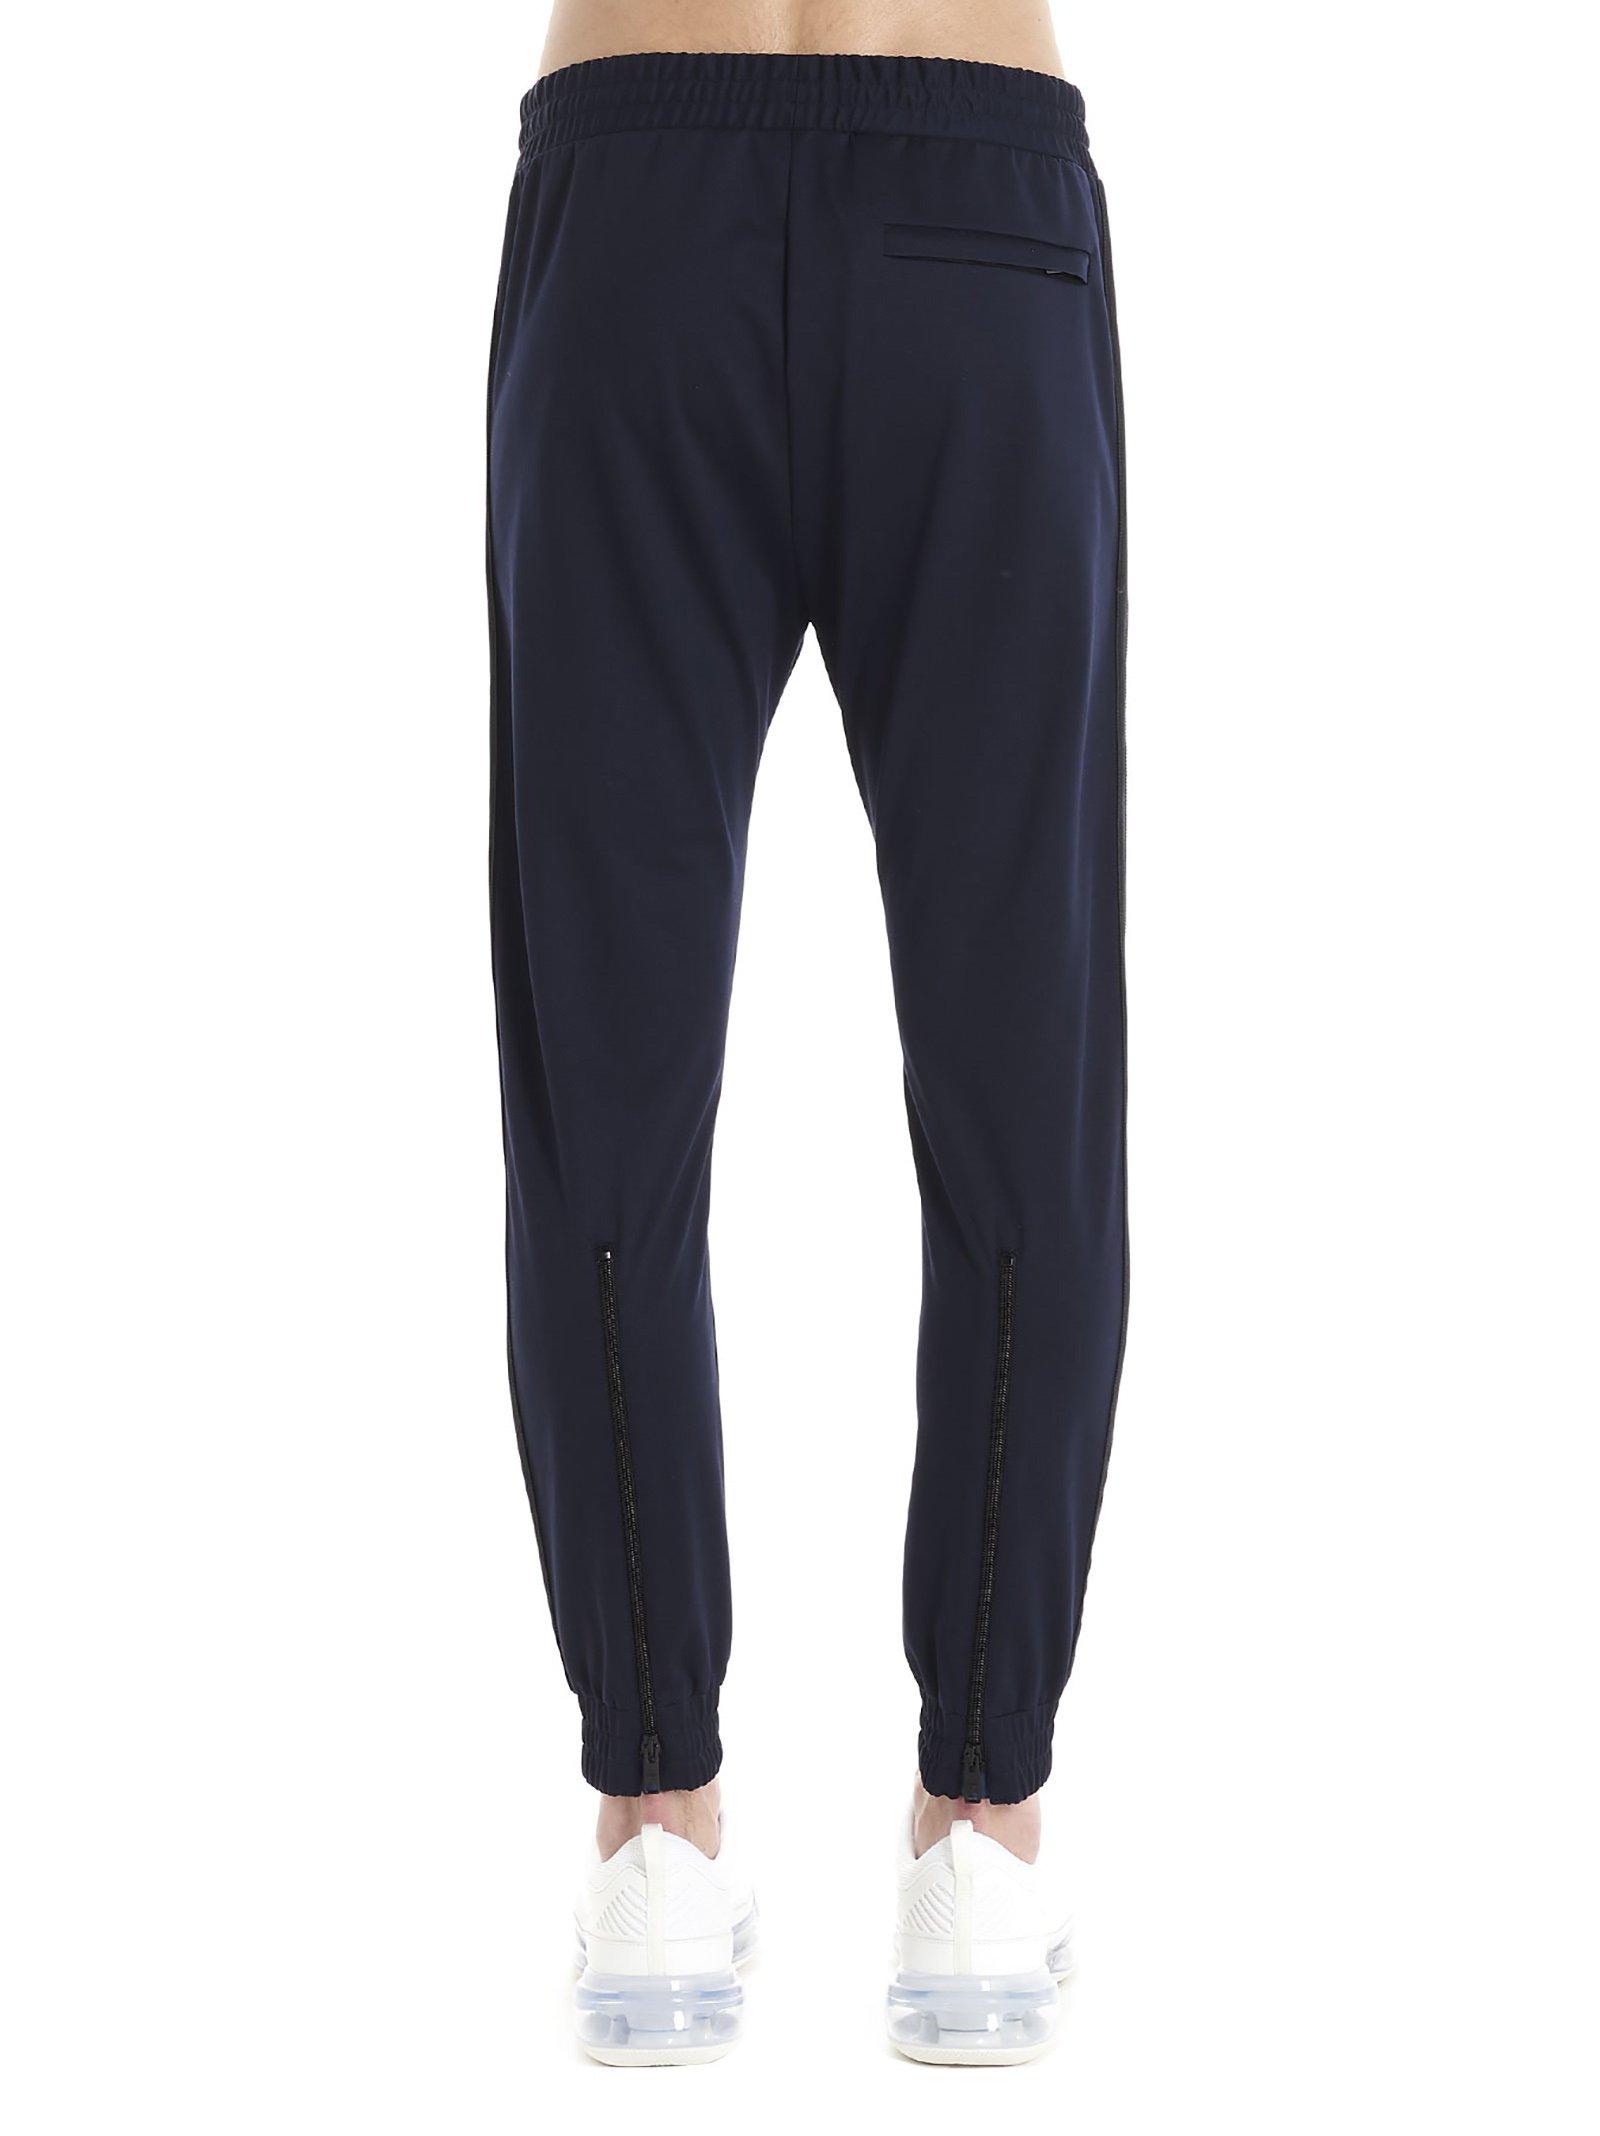 Prada Synthetic Tapered Jersey Sweatpants in Blue for Men - Lyst